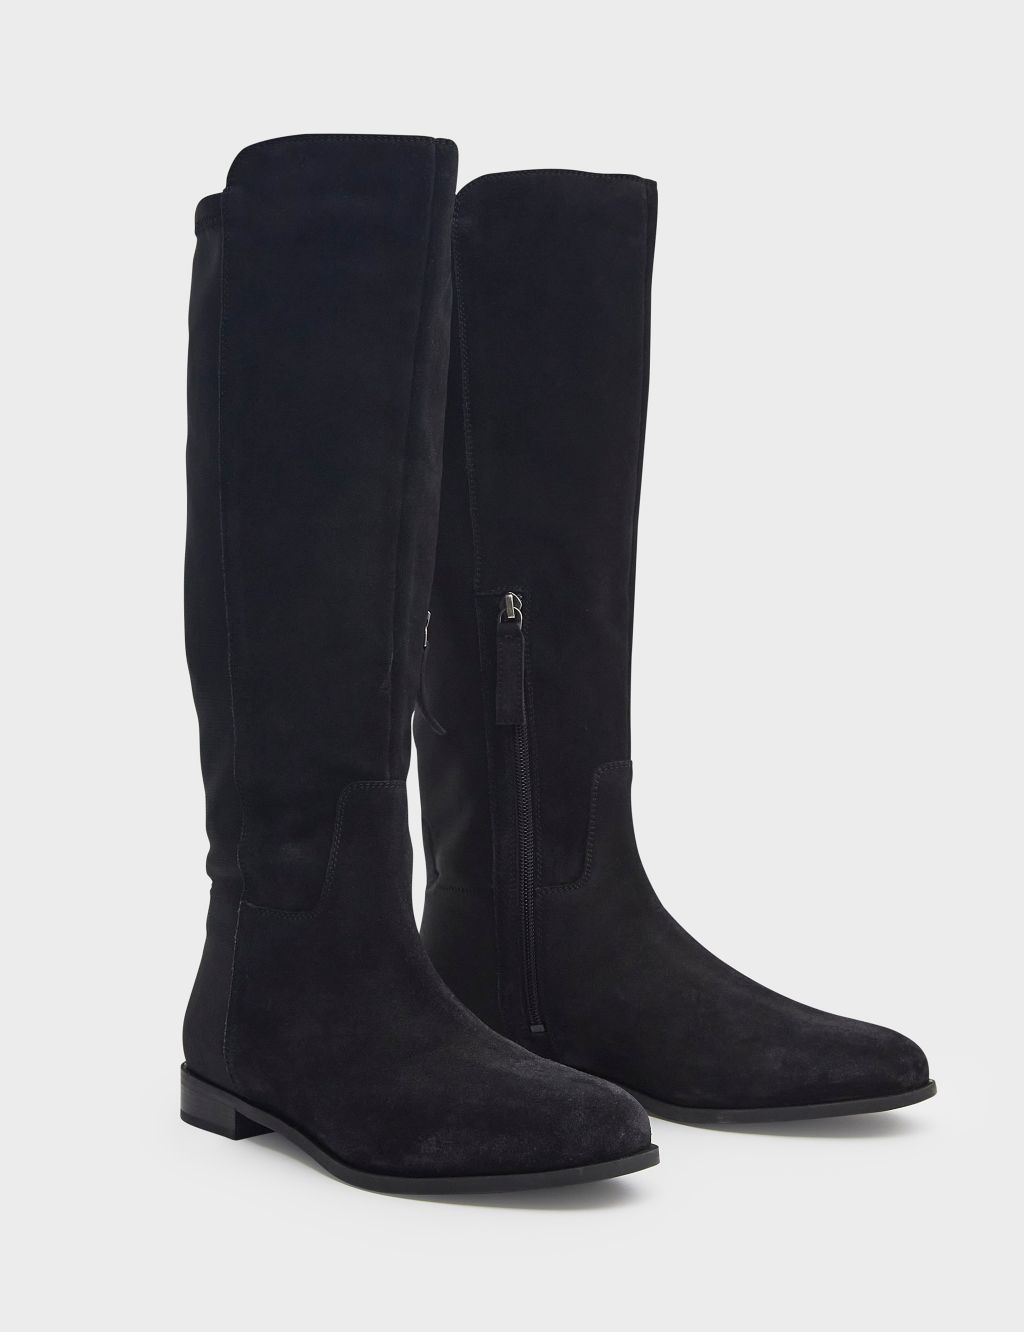 Suede Flat Knee High Boots | Crew Clothing | M&S